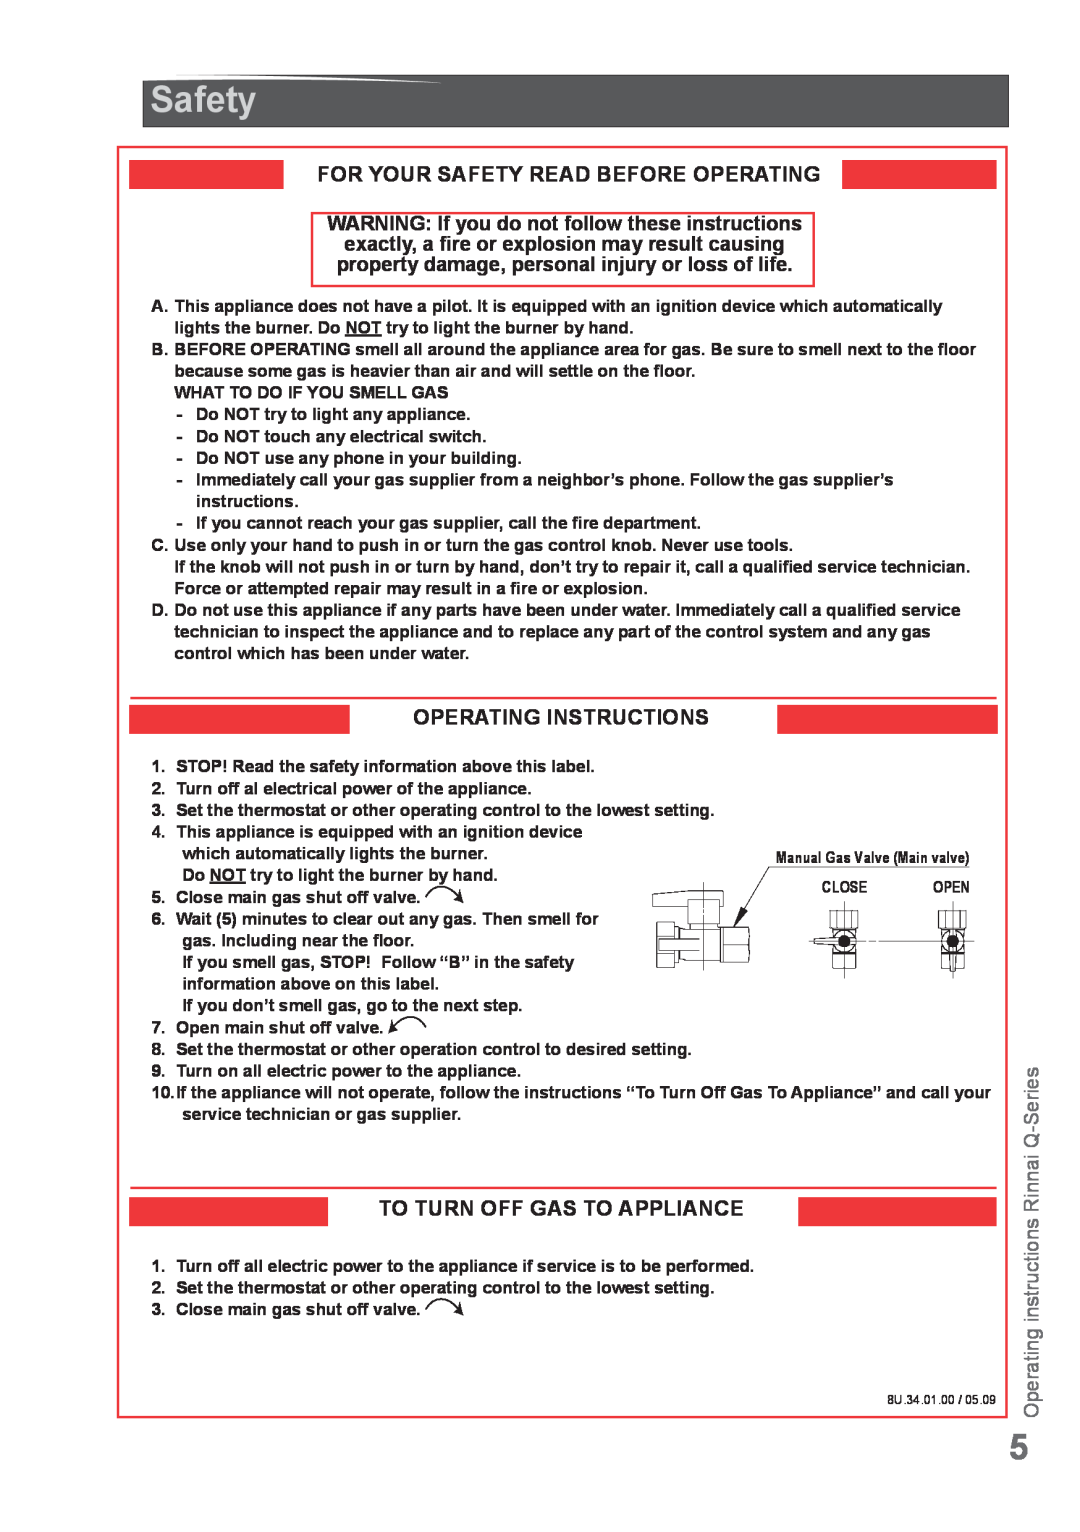 Rinnai Q175SP, Q175CP manual For Your Safety Read Before Operating, Operating Instructions, To Turn Off Gas To Appliance 